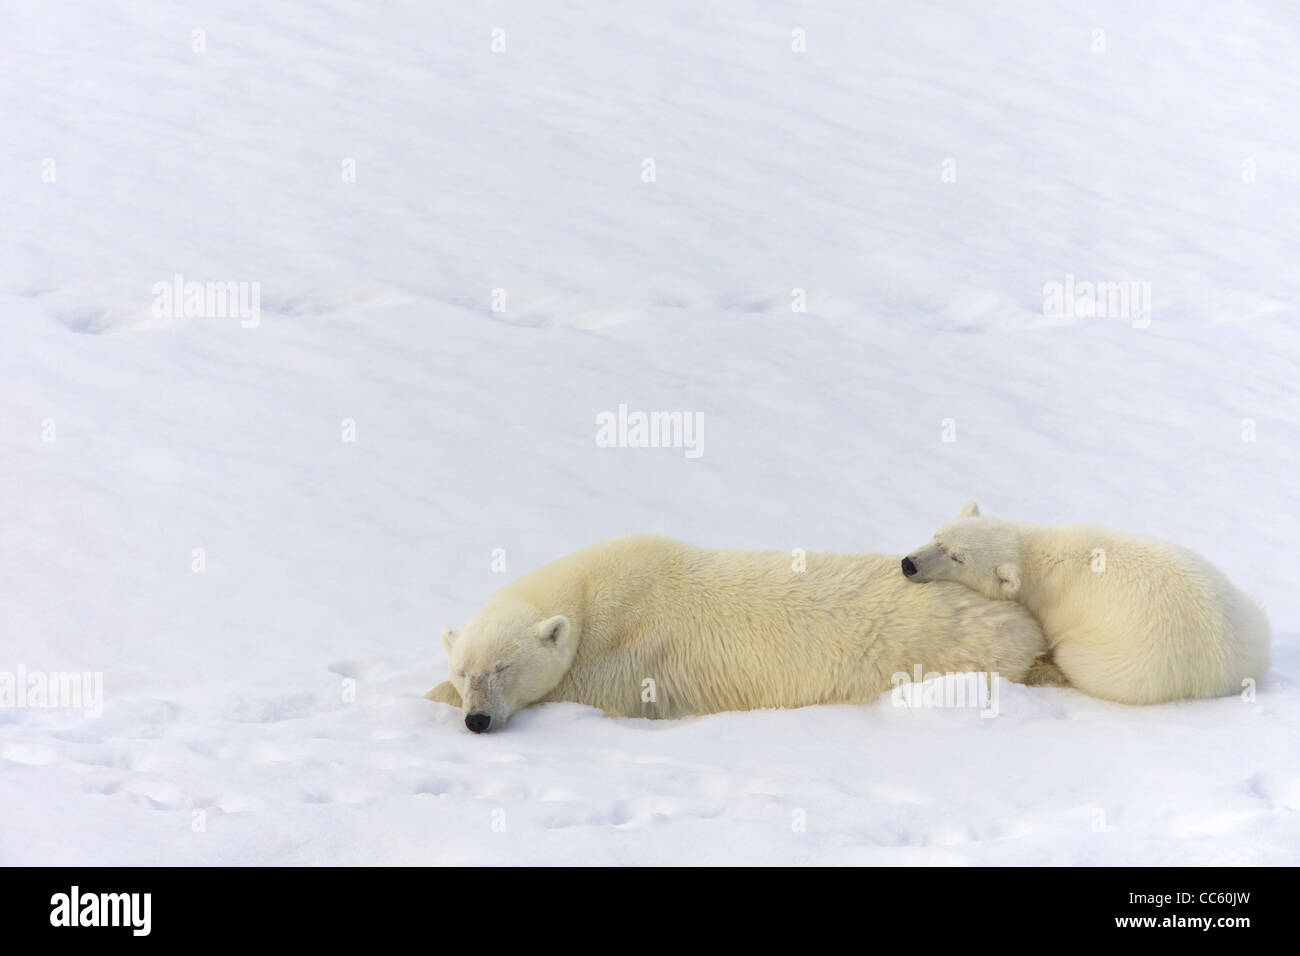 Female polar bear and 18-month-old cub sleeping in snow, Spitzbergen, Svalbard, Arctic Norway, Europe Stock Photo